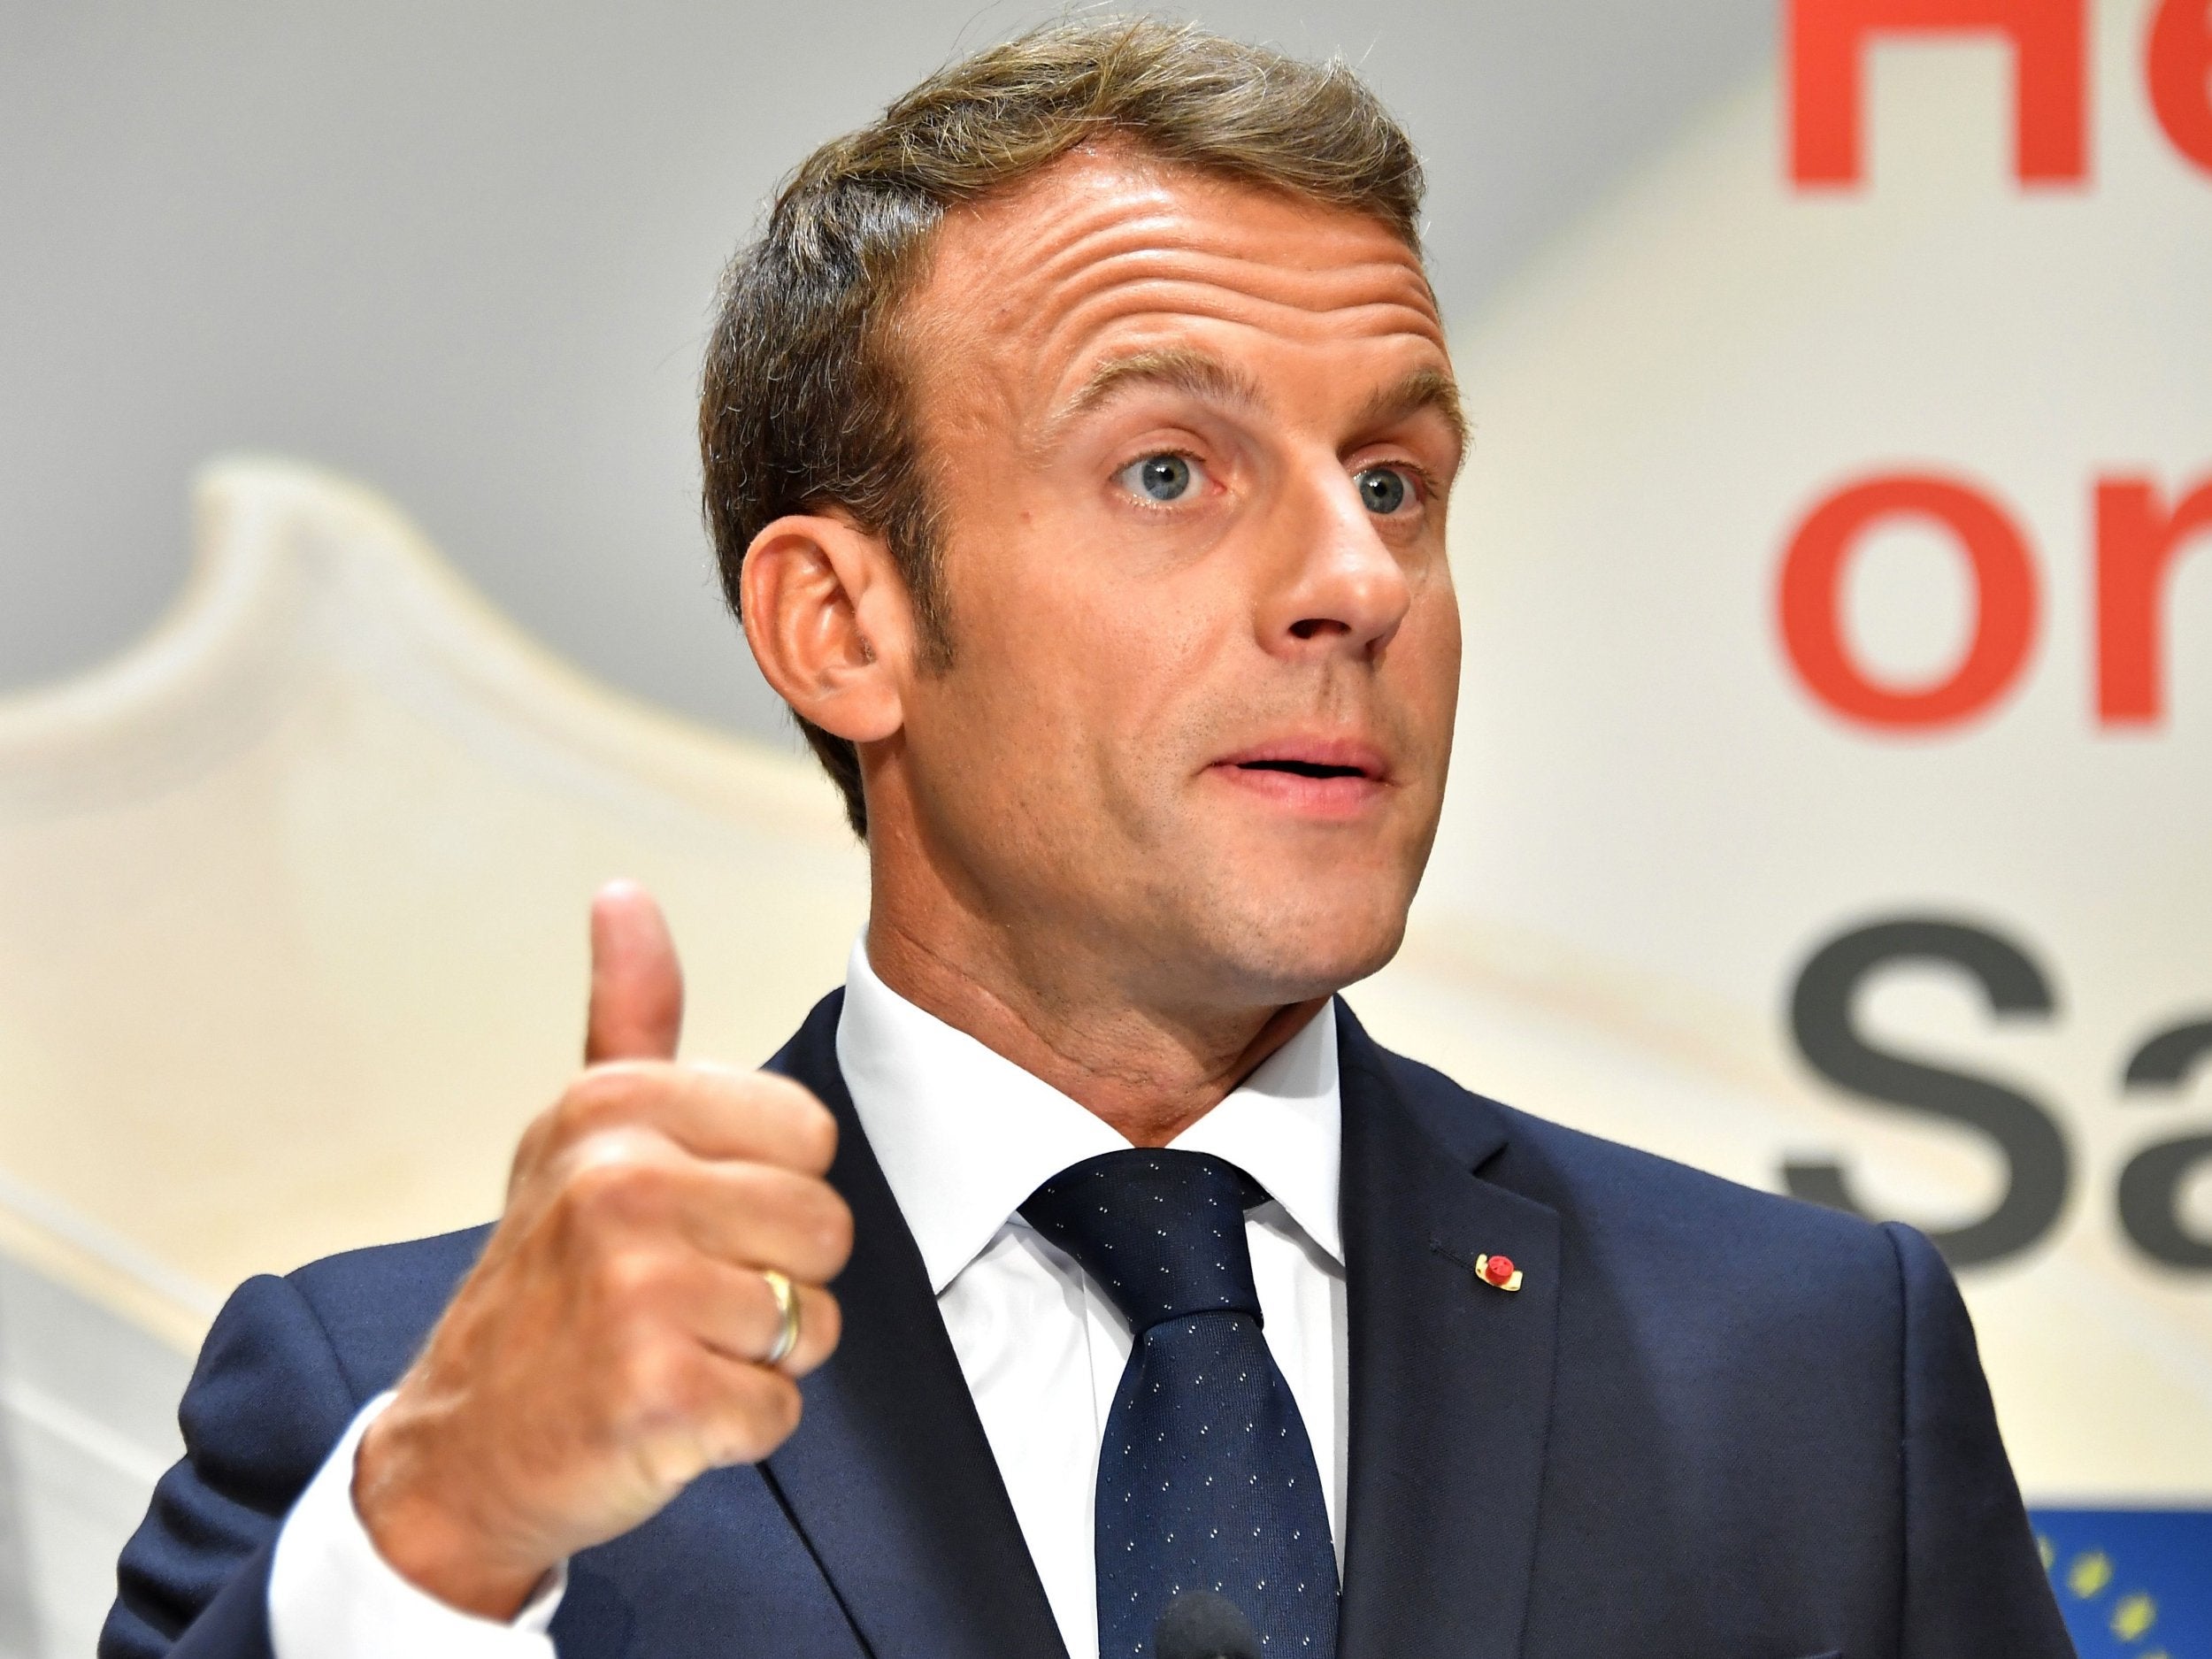 Public confidence in French President Emmanuel Macron is rapidly waning says poll